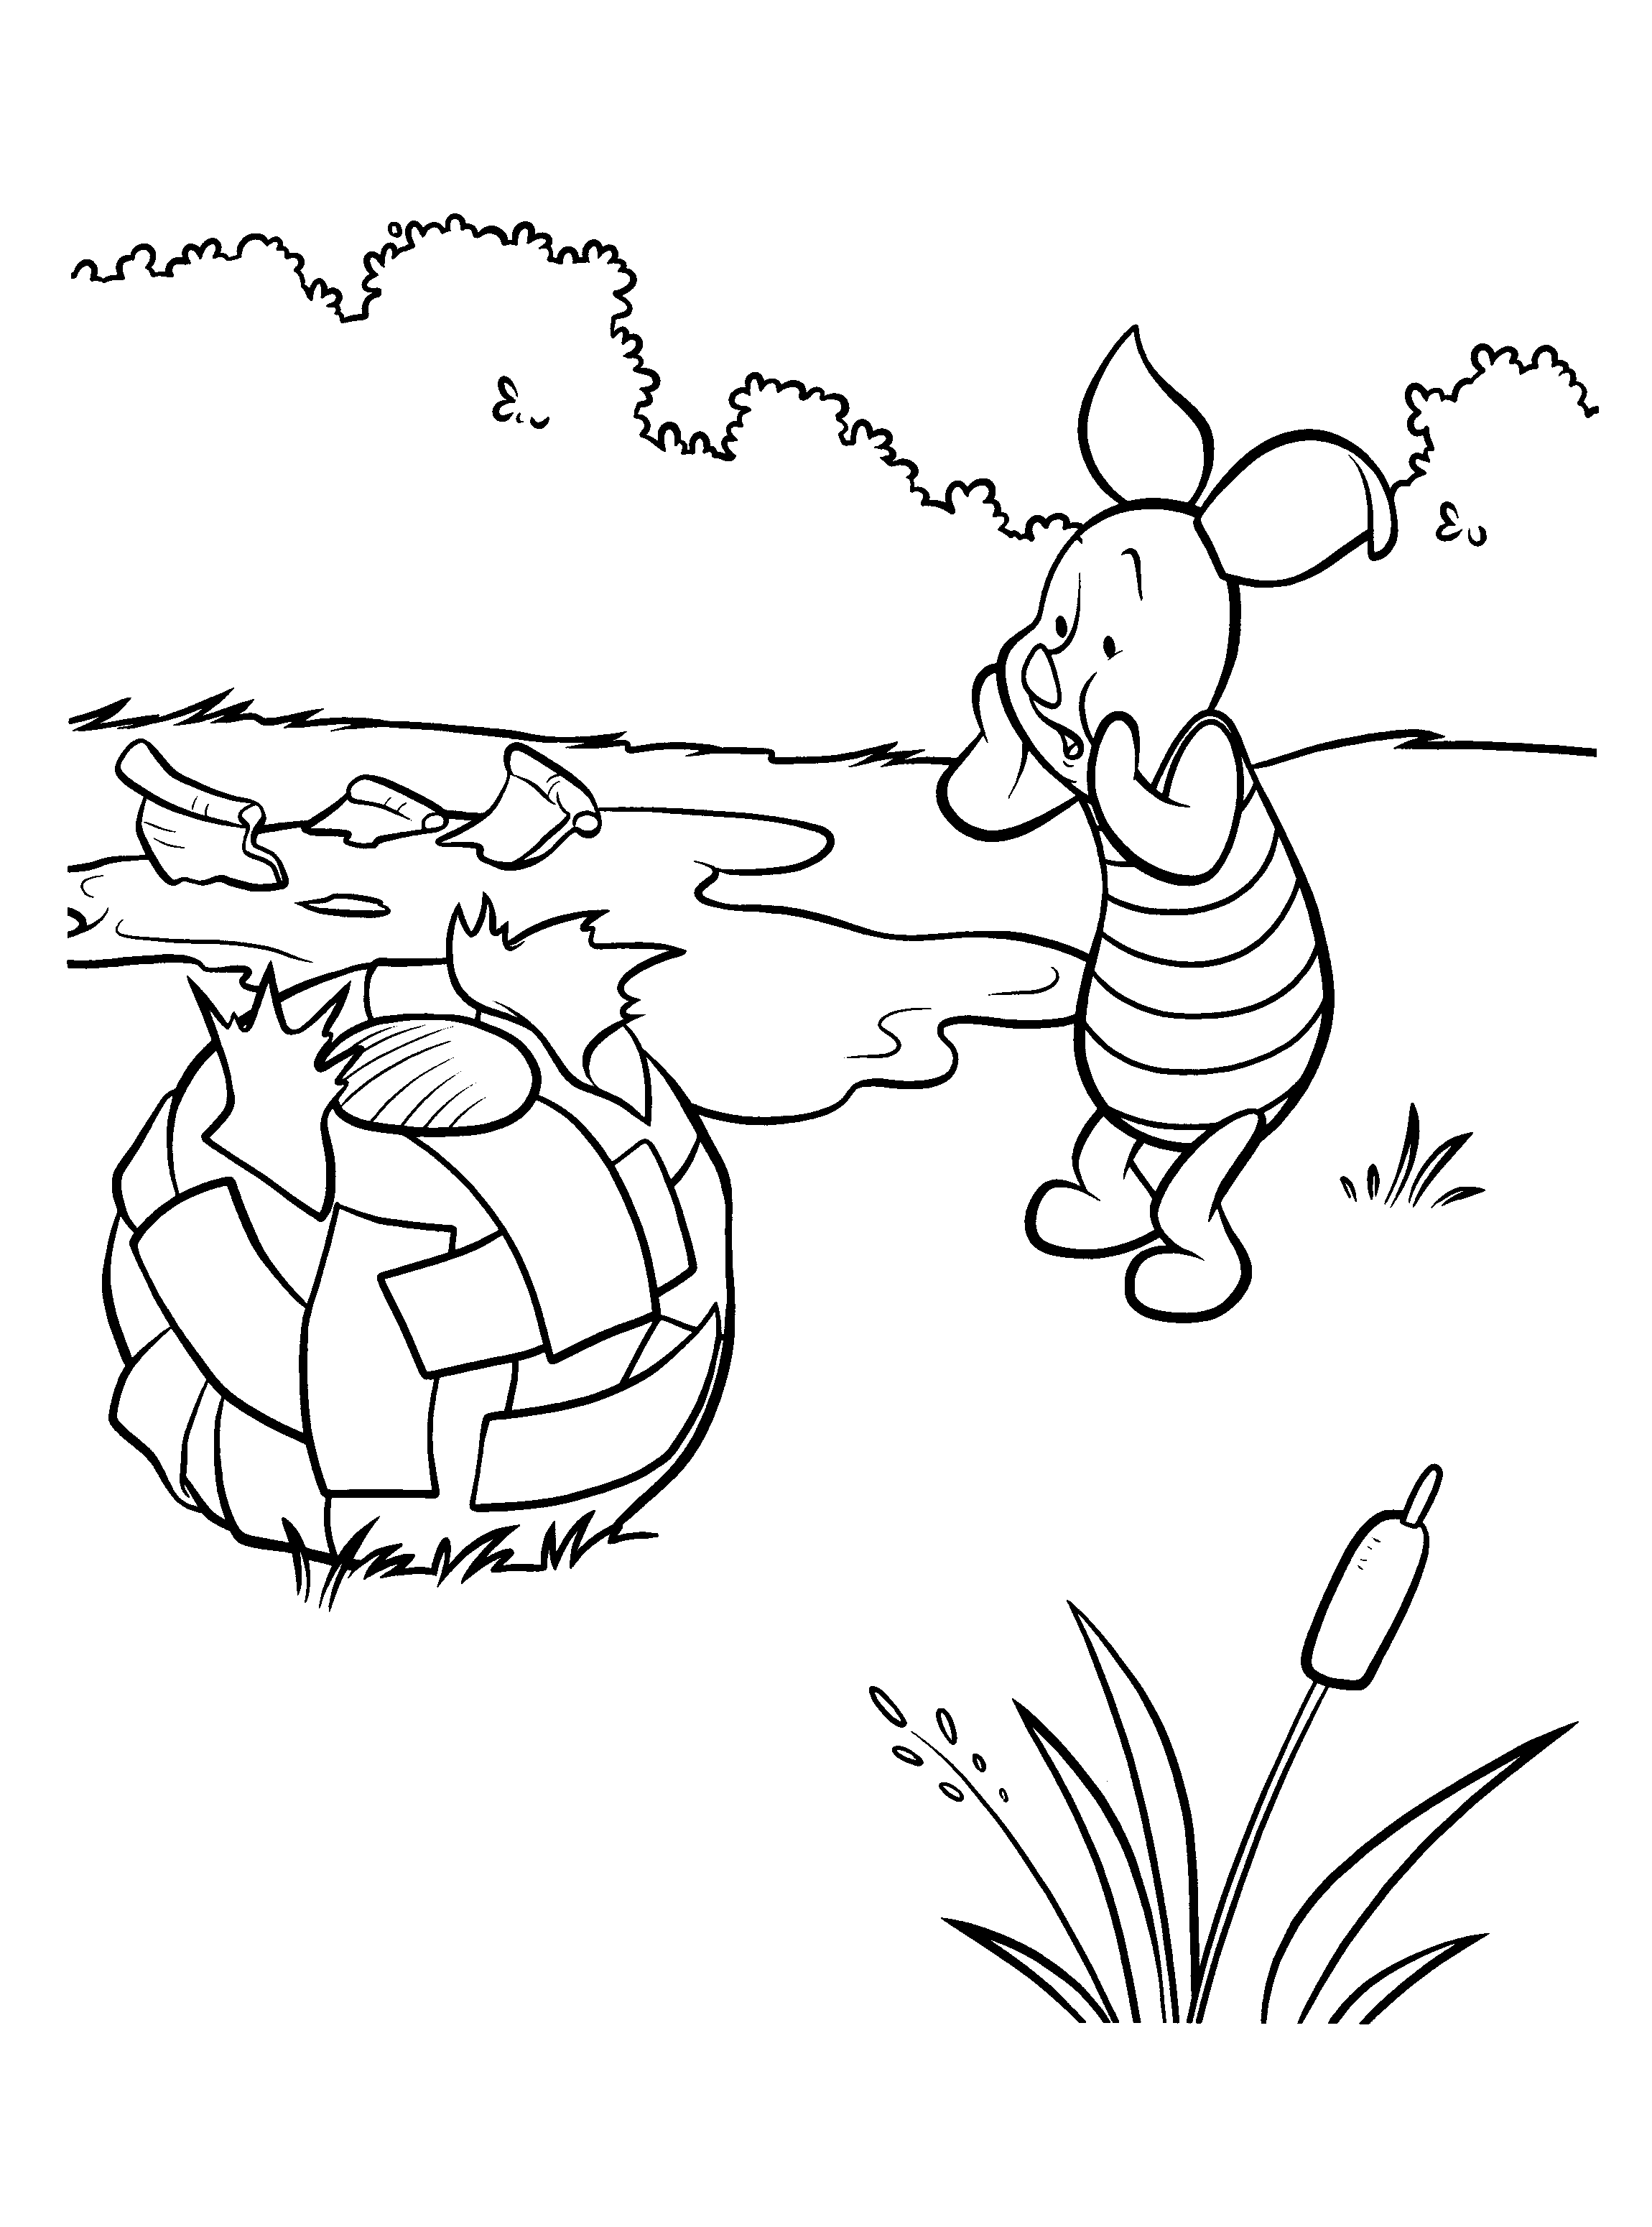 Coloring Pages Winnie the Pooh: Animated Images, Gifs, Pictures & Animations - 100% FREE!